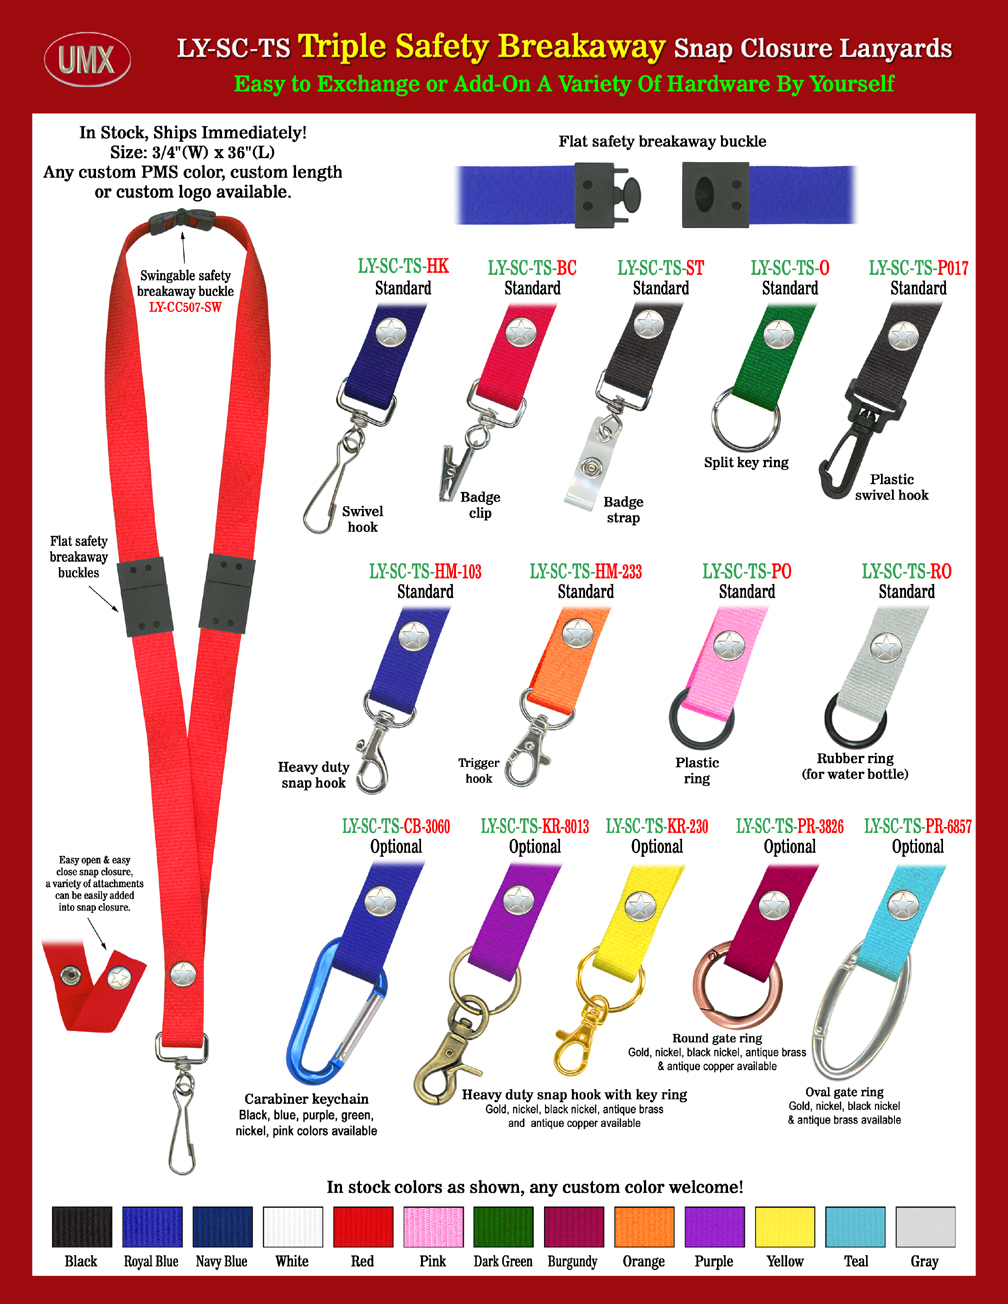 Triple Safety Snap-on Neck Lanyards With Three Safety Breakaway Locations - 3/4" Three Safety Breakaway Lanyards With Triple Protection.